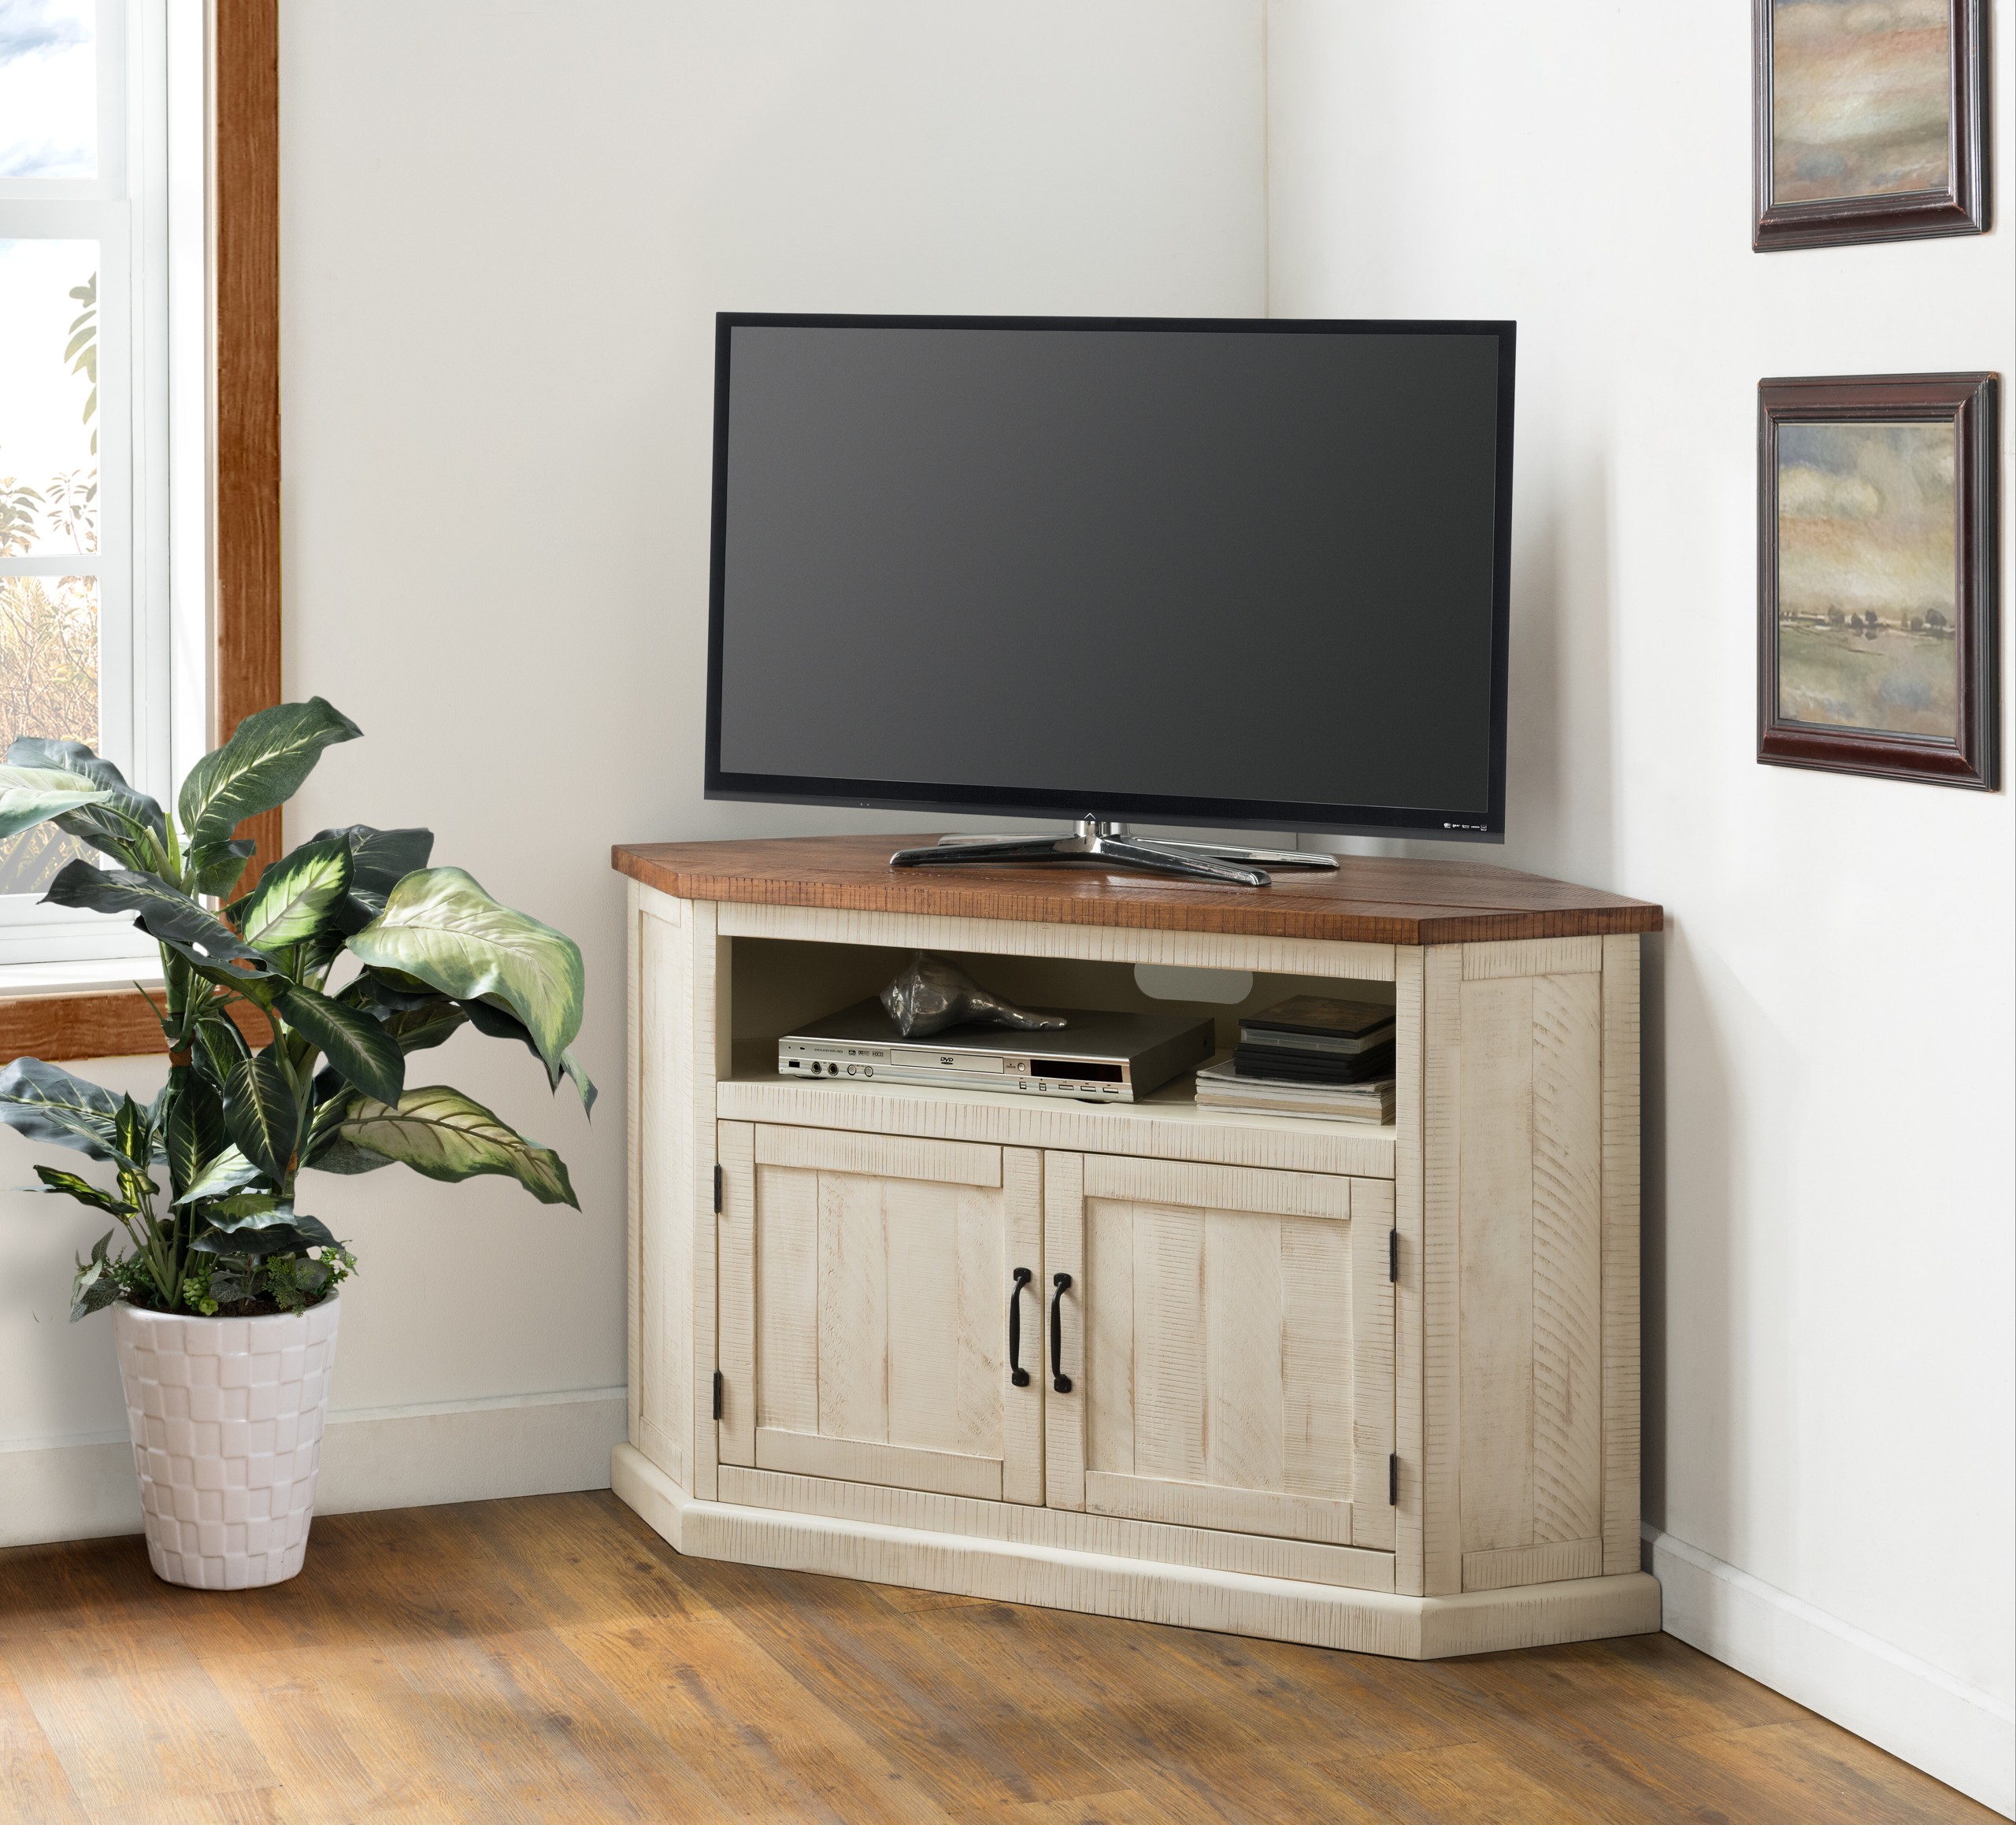 Tacoma Solid Wood Corner TV Stand for TVs up to 55 inches